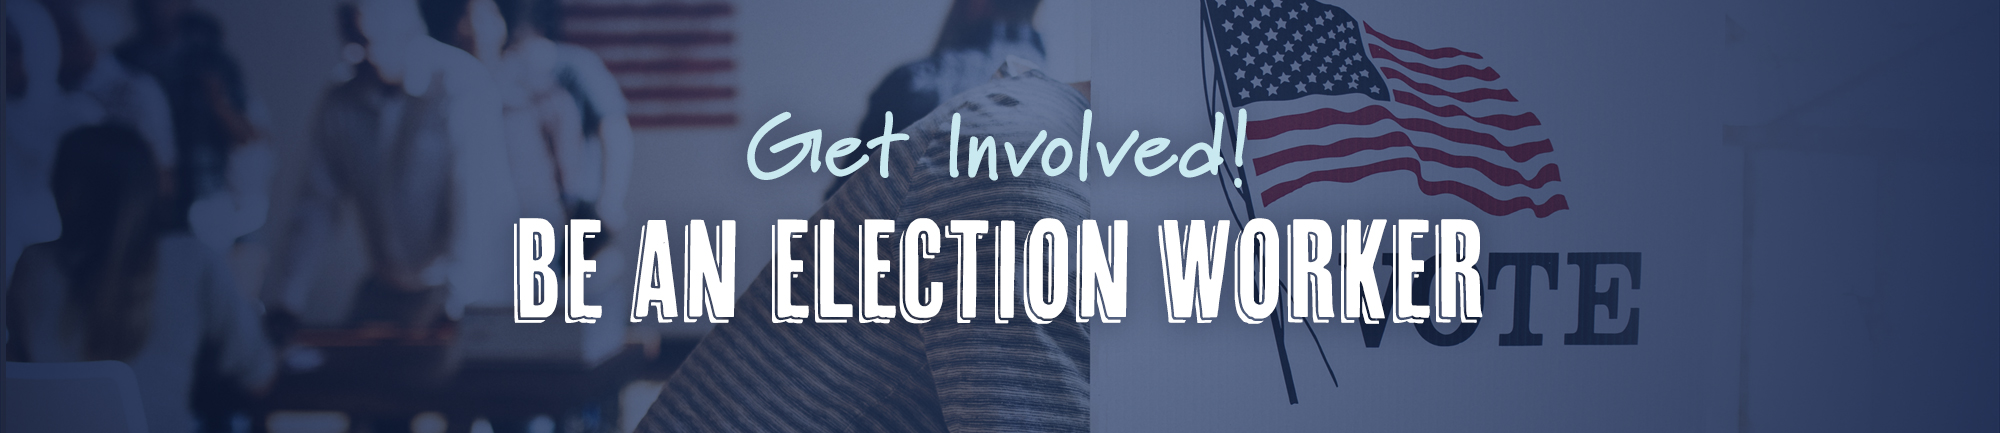 Get Involved! Be an Election Worker